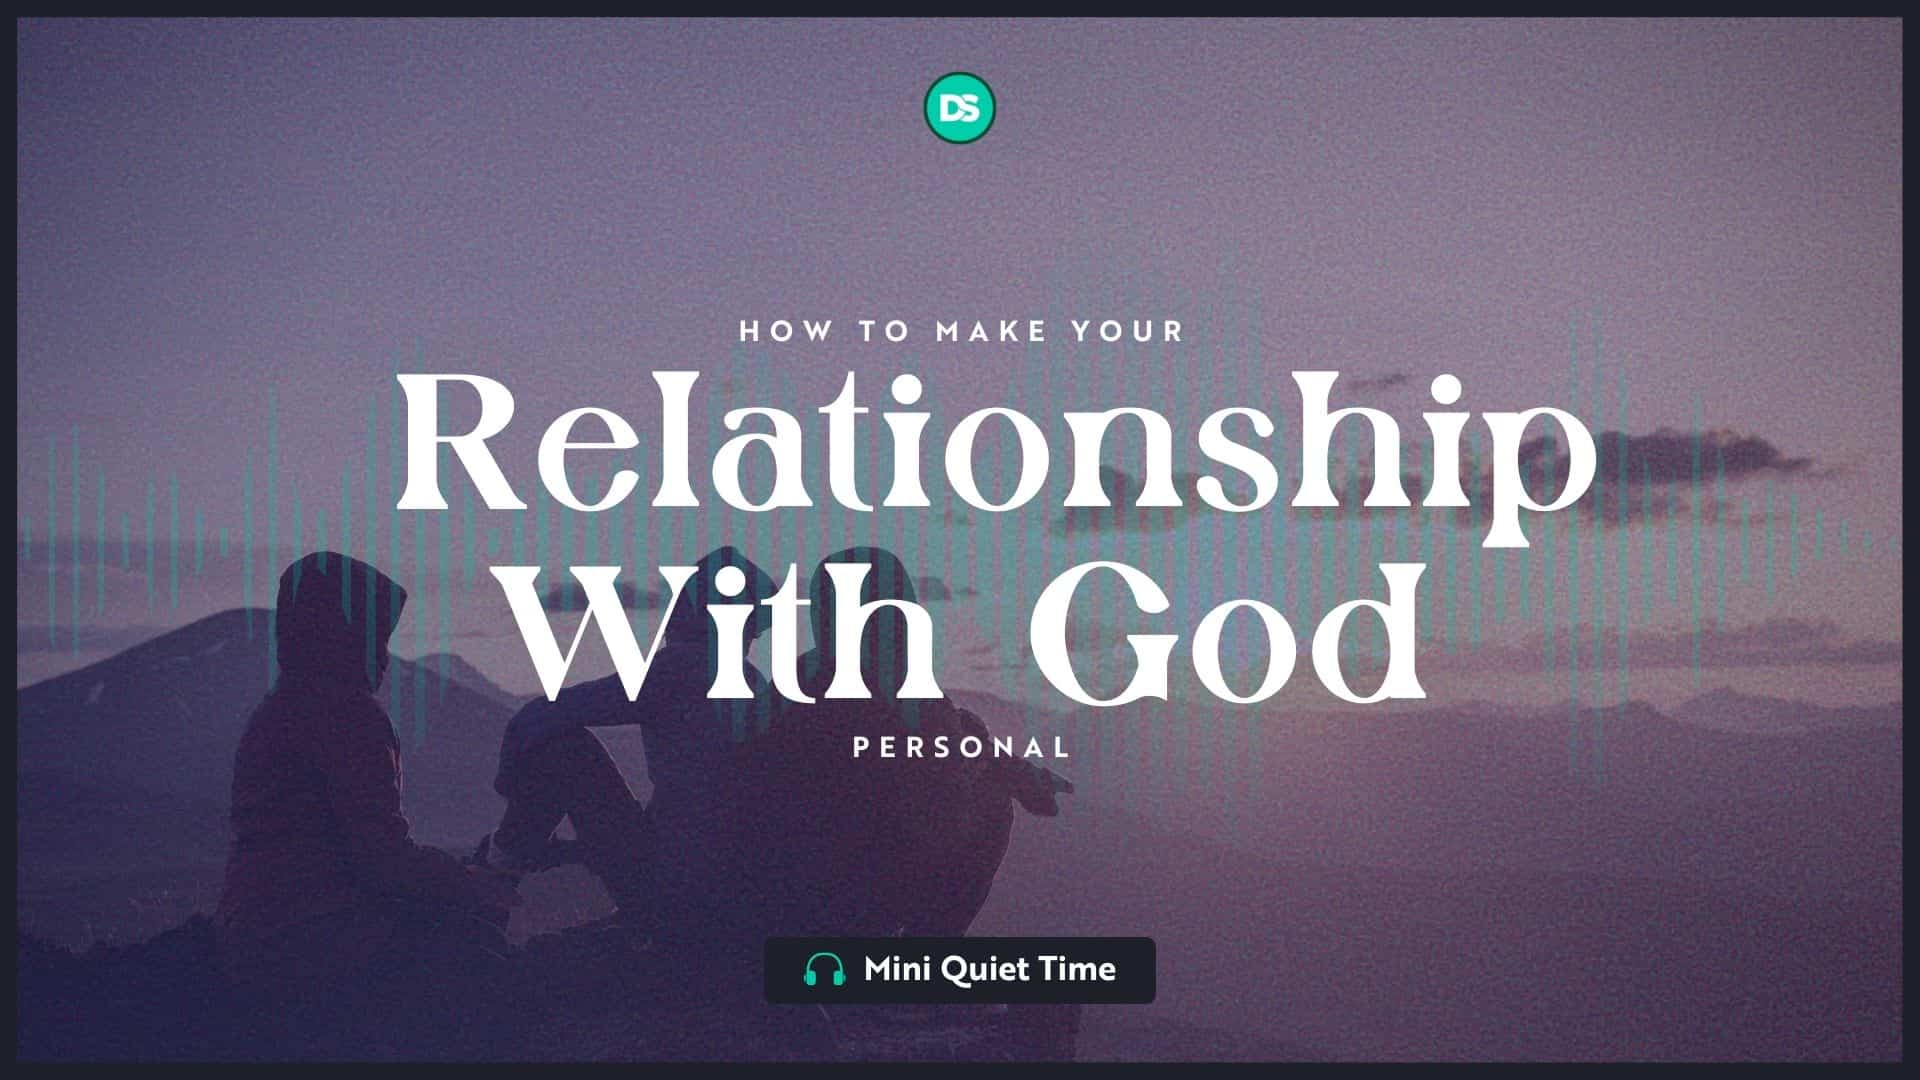 How to Make Your Relationship With God Personal (Mini Quiet Time) 6